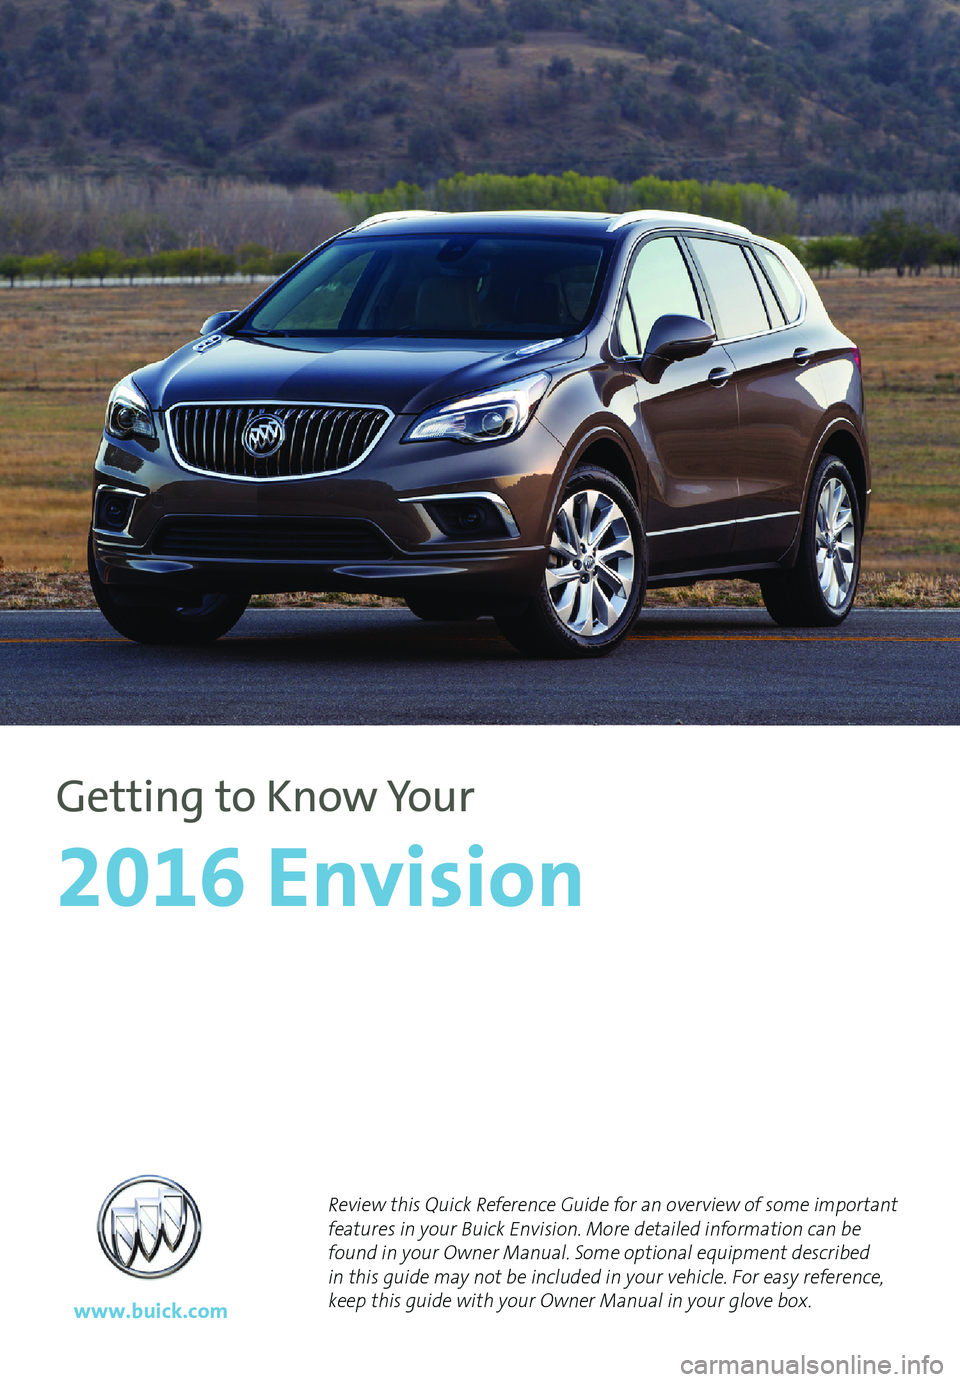 BUICK ENVISION 2016  Get To Know Guide 1
Review this Quick Reference Guide for an overview of some important 
features in your Buick Envision. More detailed information can be 
found in your Owner Manual. Some optional equipment
 described